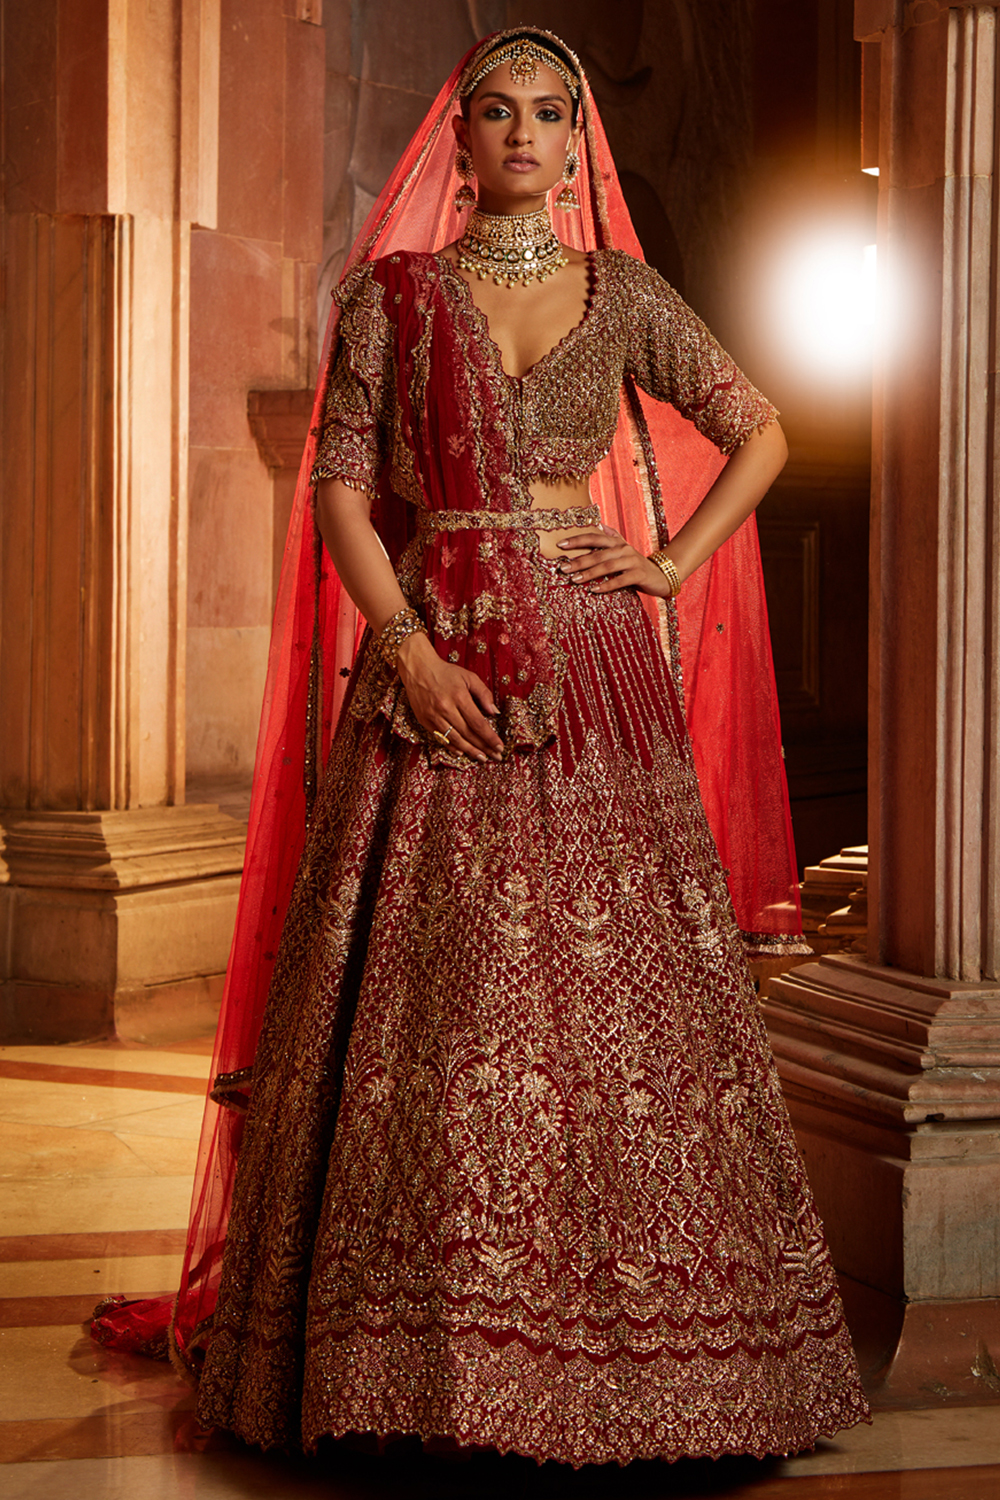 Blood Red Raw Silk Lehenga Choli And Belt With Tulle Dupatta With An Optional Lighter Second Dupatta